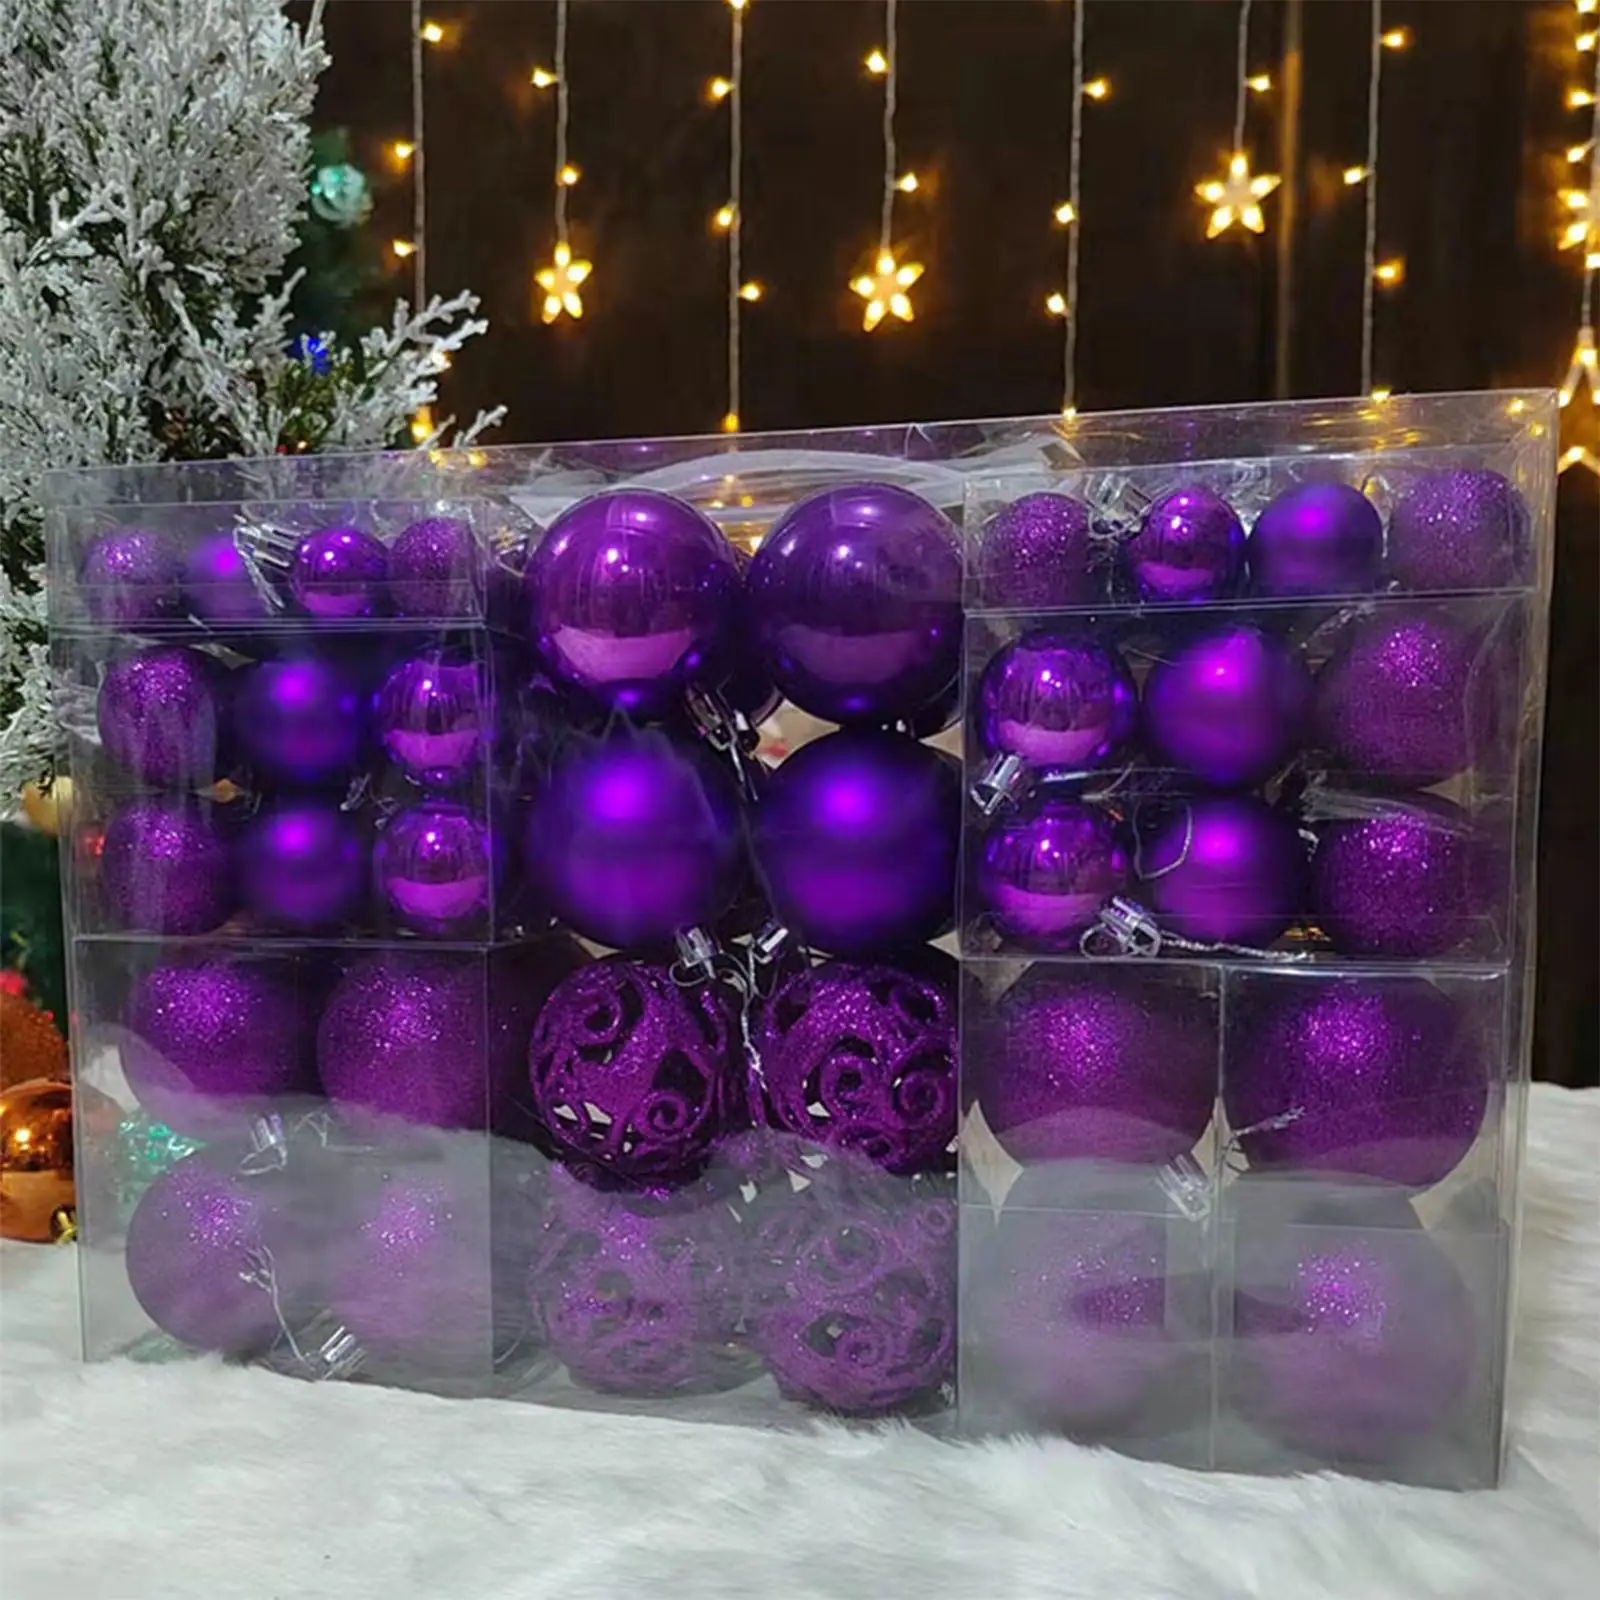 100 Pieces Hanging Christmas balls Pendants Shatterproof Xmas Baubles for Festival New Year Decor